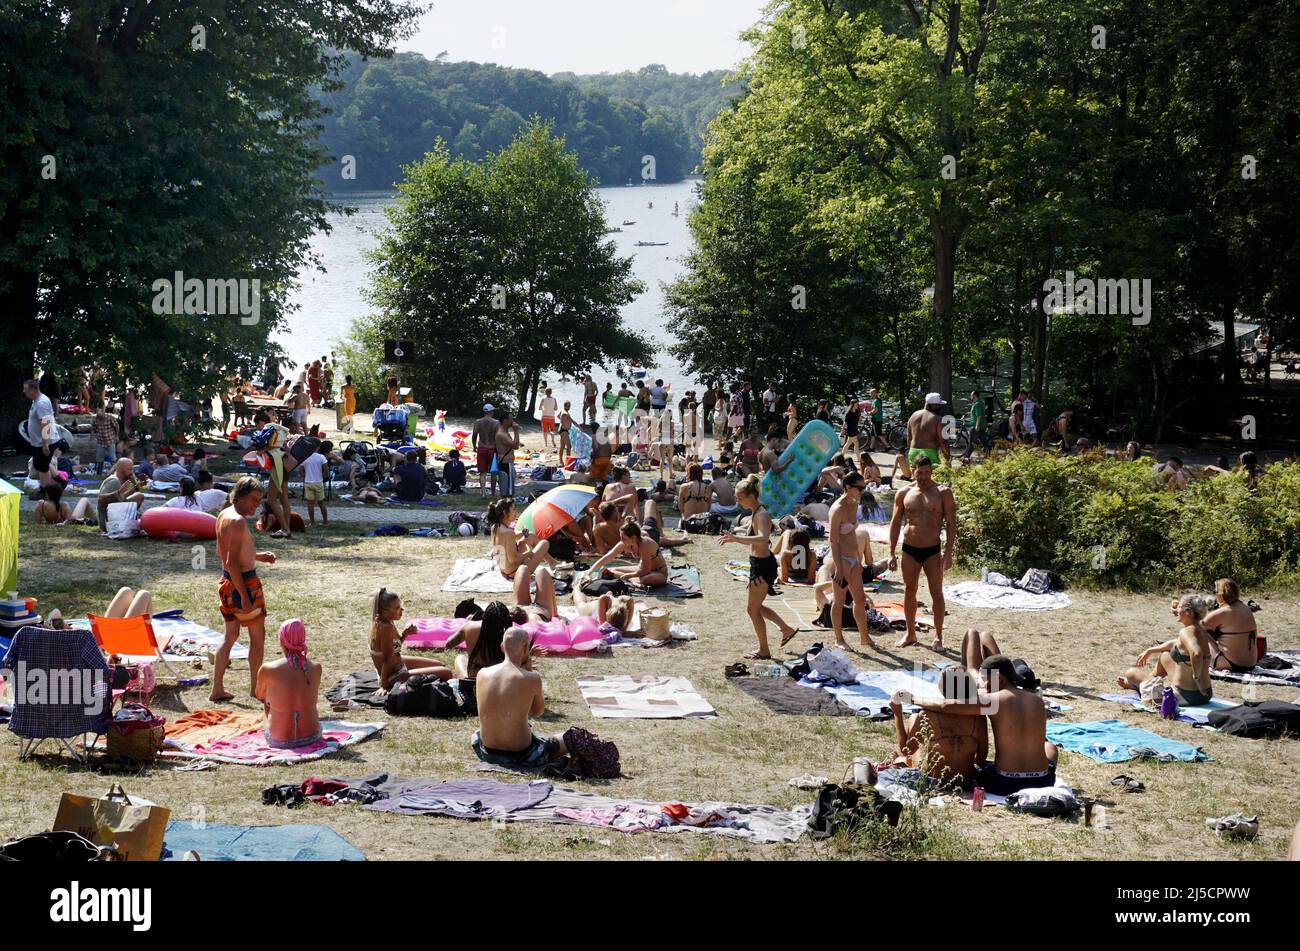 Berlin, DEU, 07.08.2020 - Cooling off at summery 30 degrees at Berlin's Schlachtensee. Not easy to keep the distance rules. In Germany, the number of new infections is rising again. The fear of a second Corona wave is there. [automated translation] Stock Photo